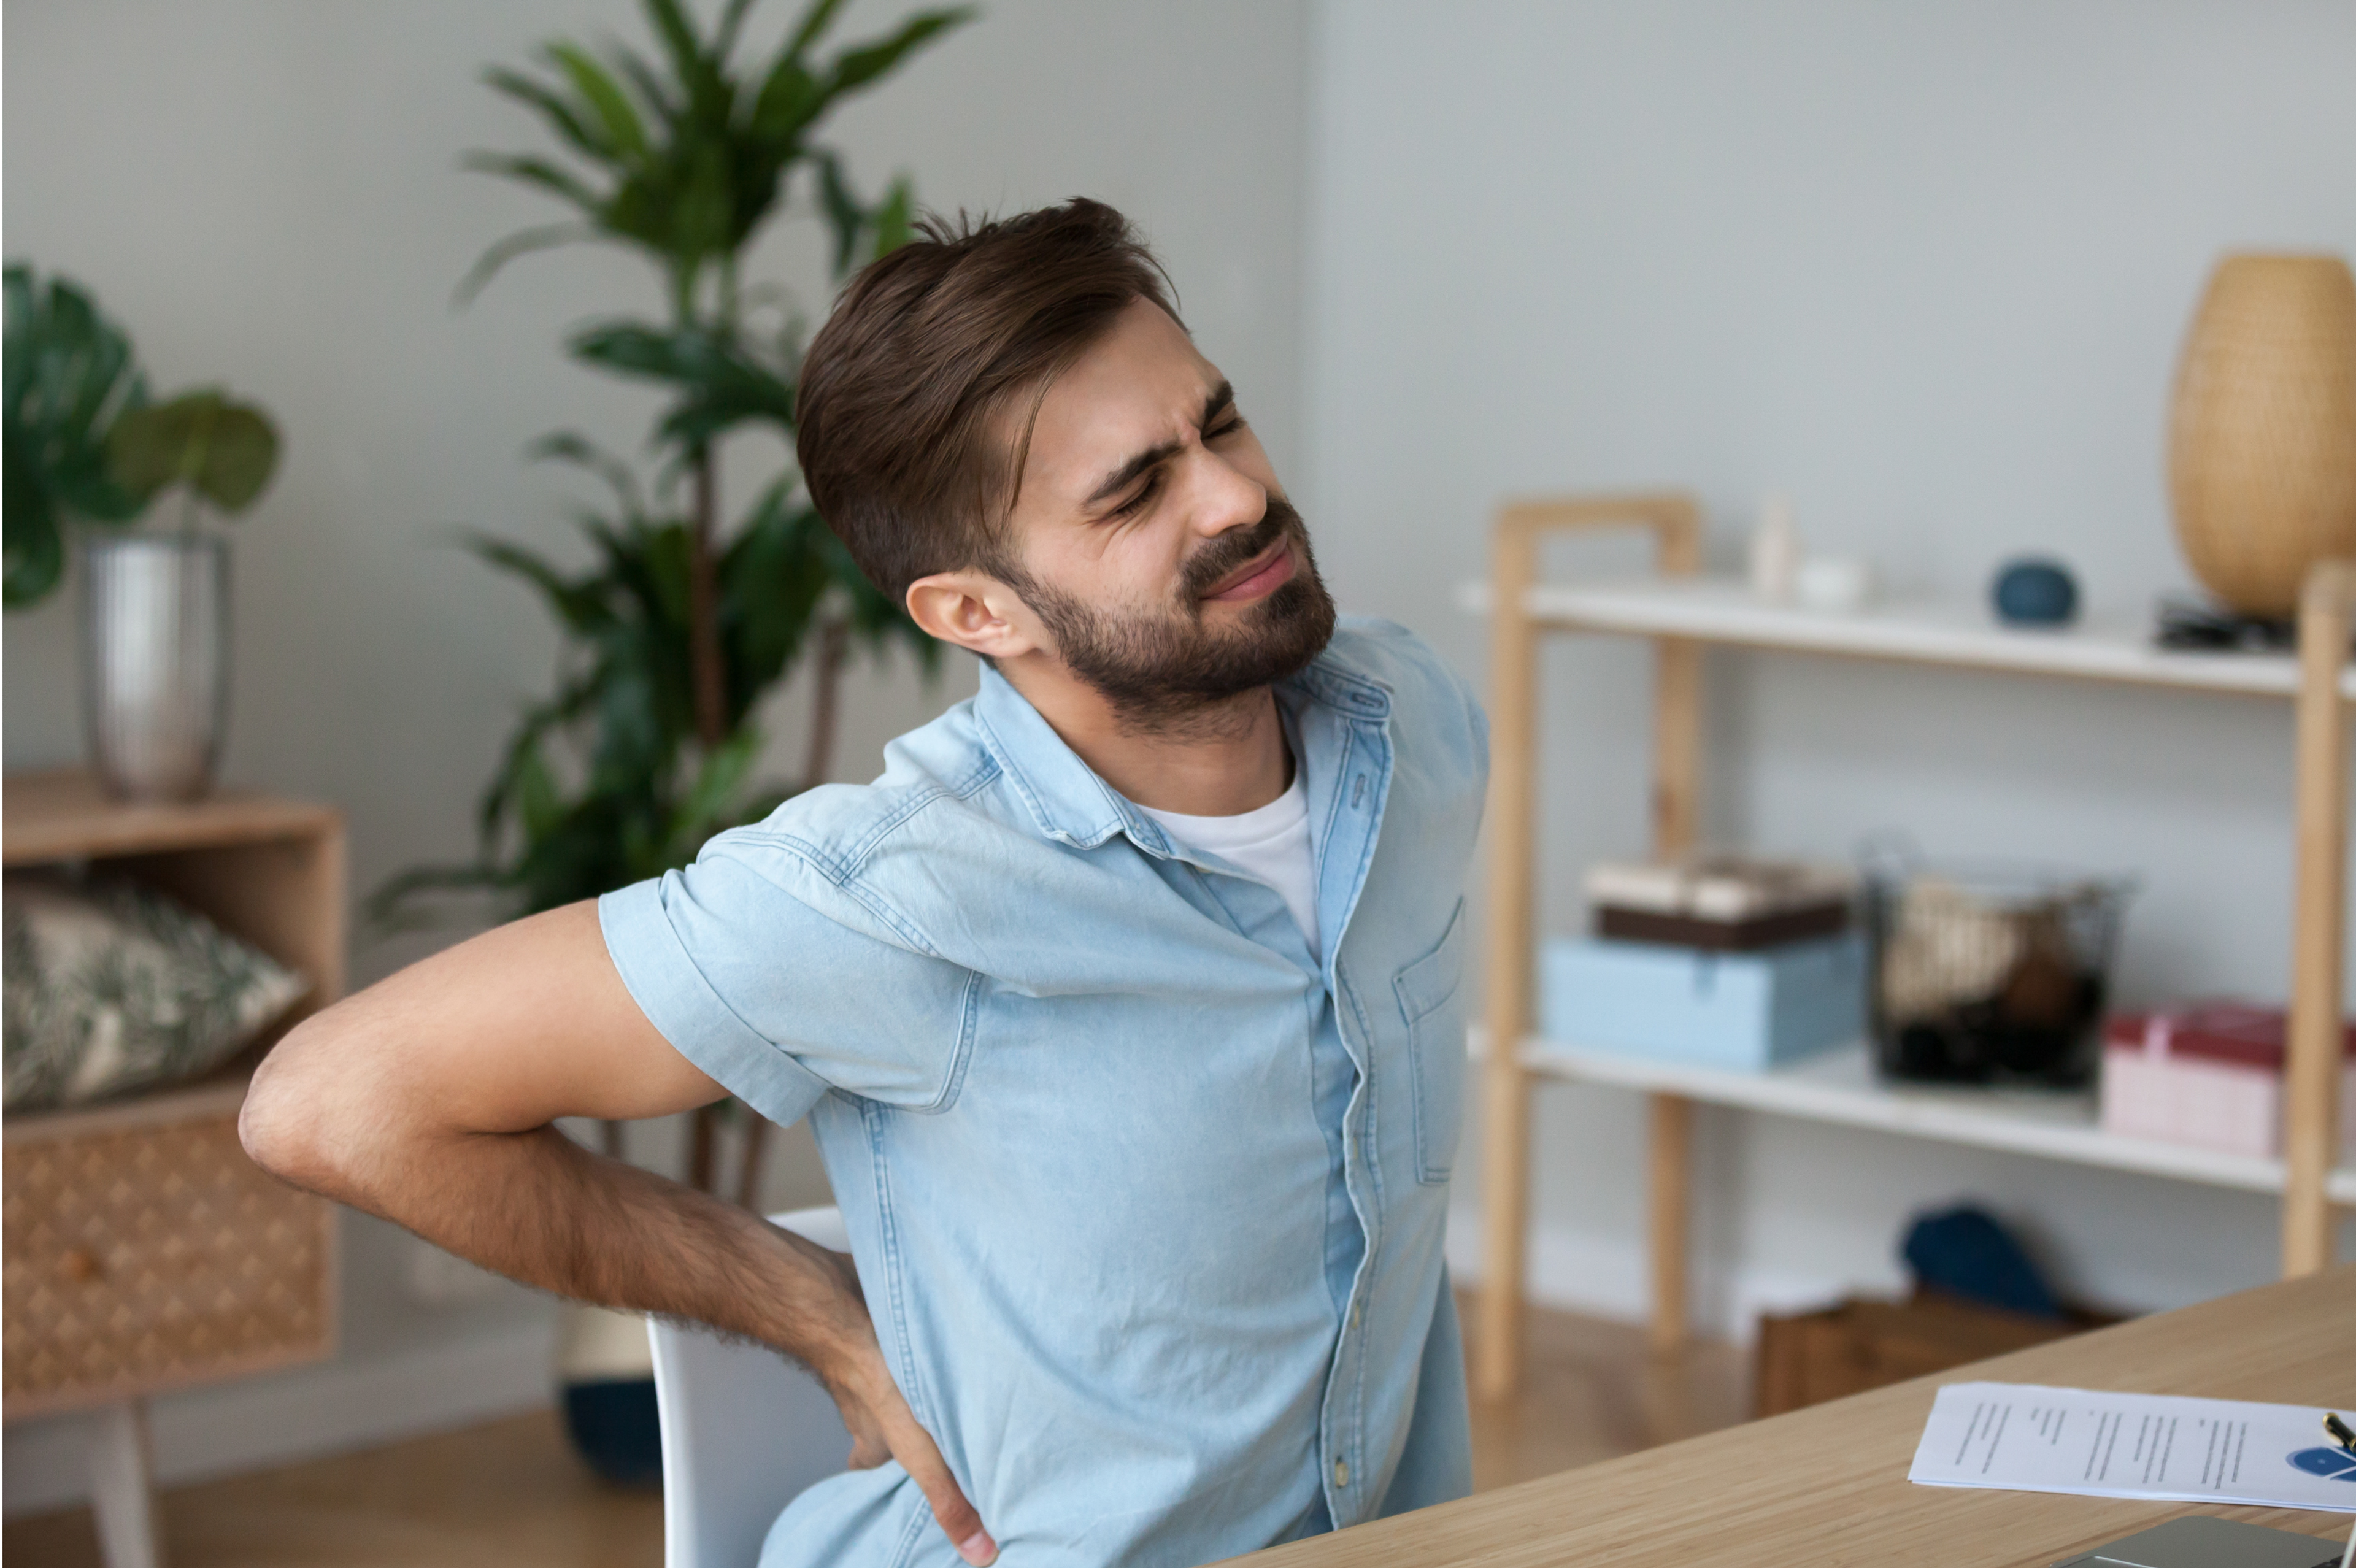 The research suggests that chasing the "perfect" sitting posture may be a waste of time. Achieving a comfortable sitting position and moving regularly appears to be more effective for back pain.